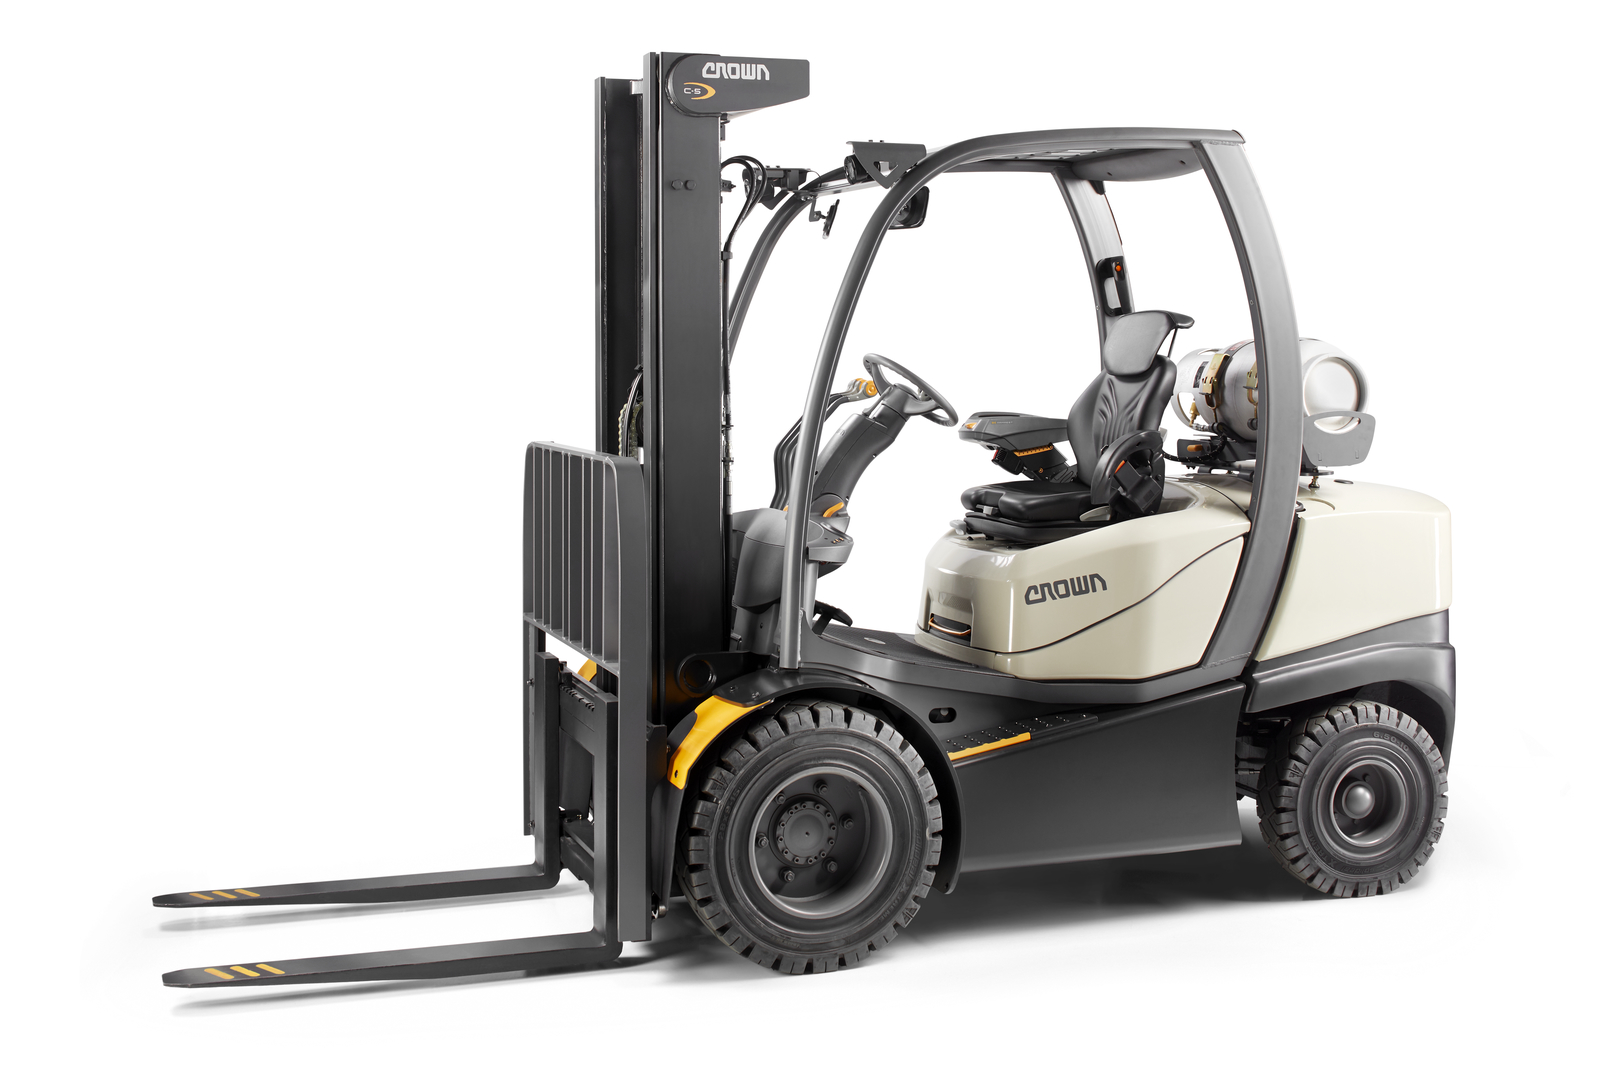 forklift for sale buffalo ny, lifttruck for sale buffalo ny, forklift for sale fredonia ny, lift truck for sale fredonia ny, wny area forklift dealer.